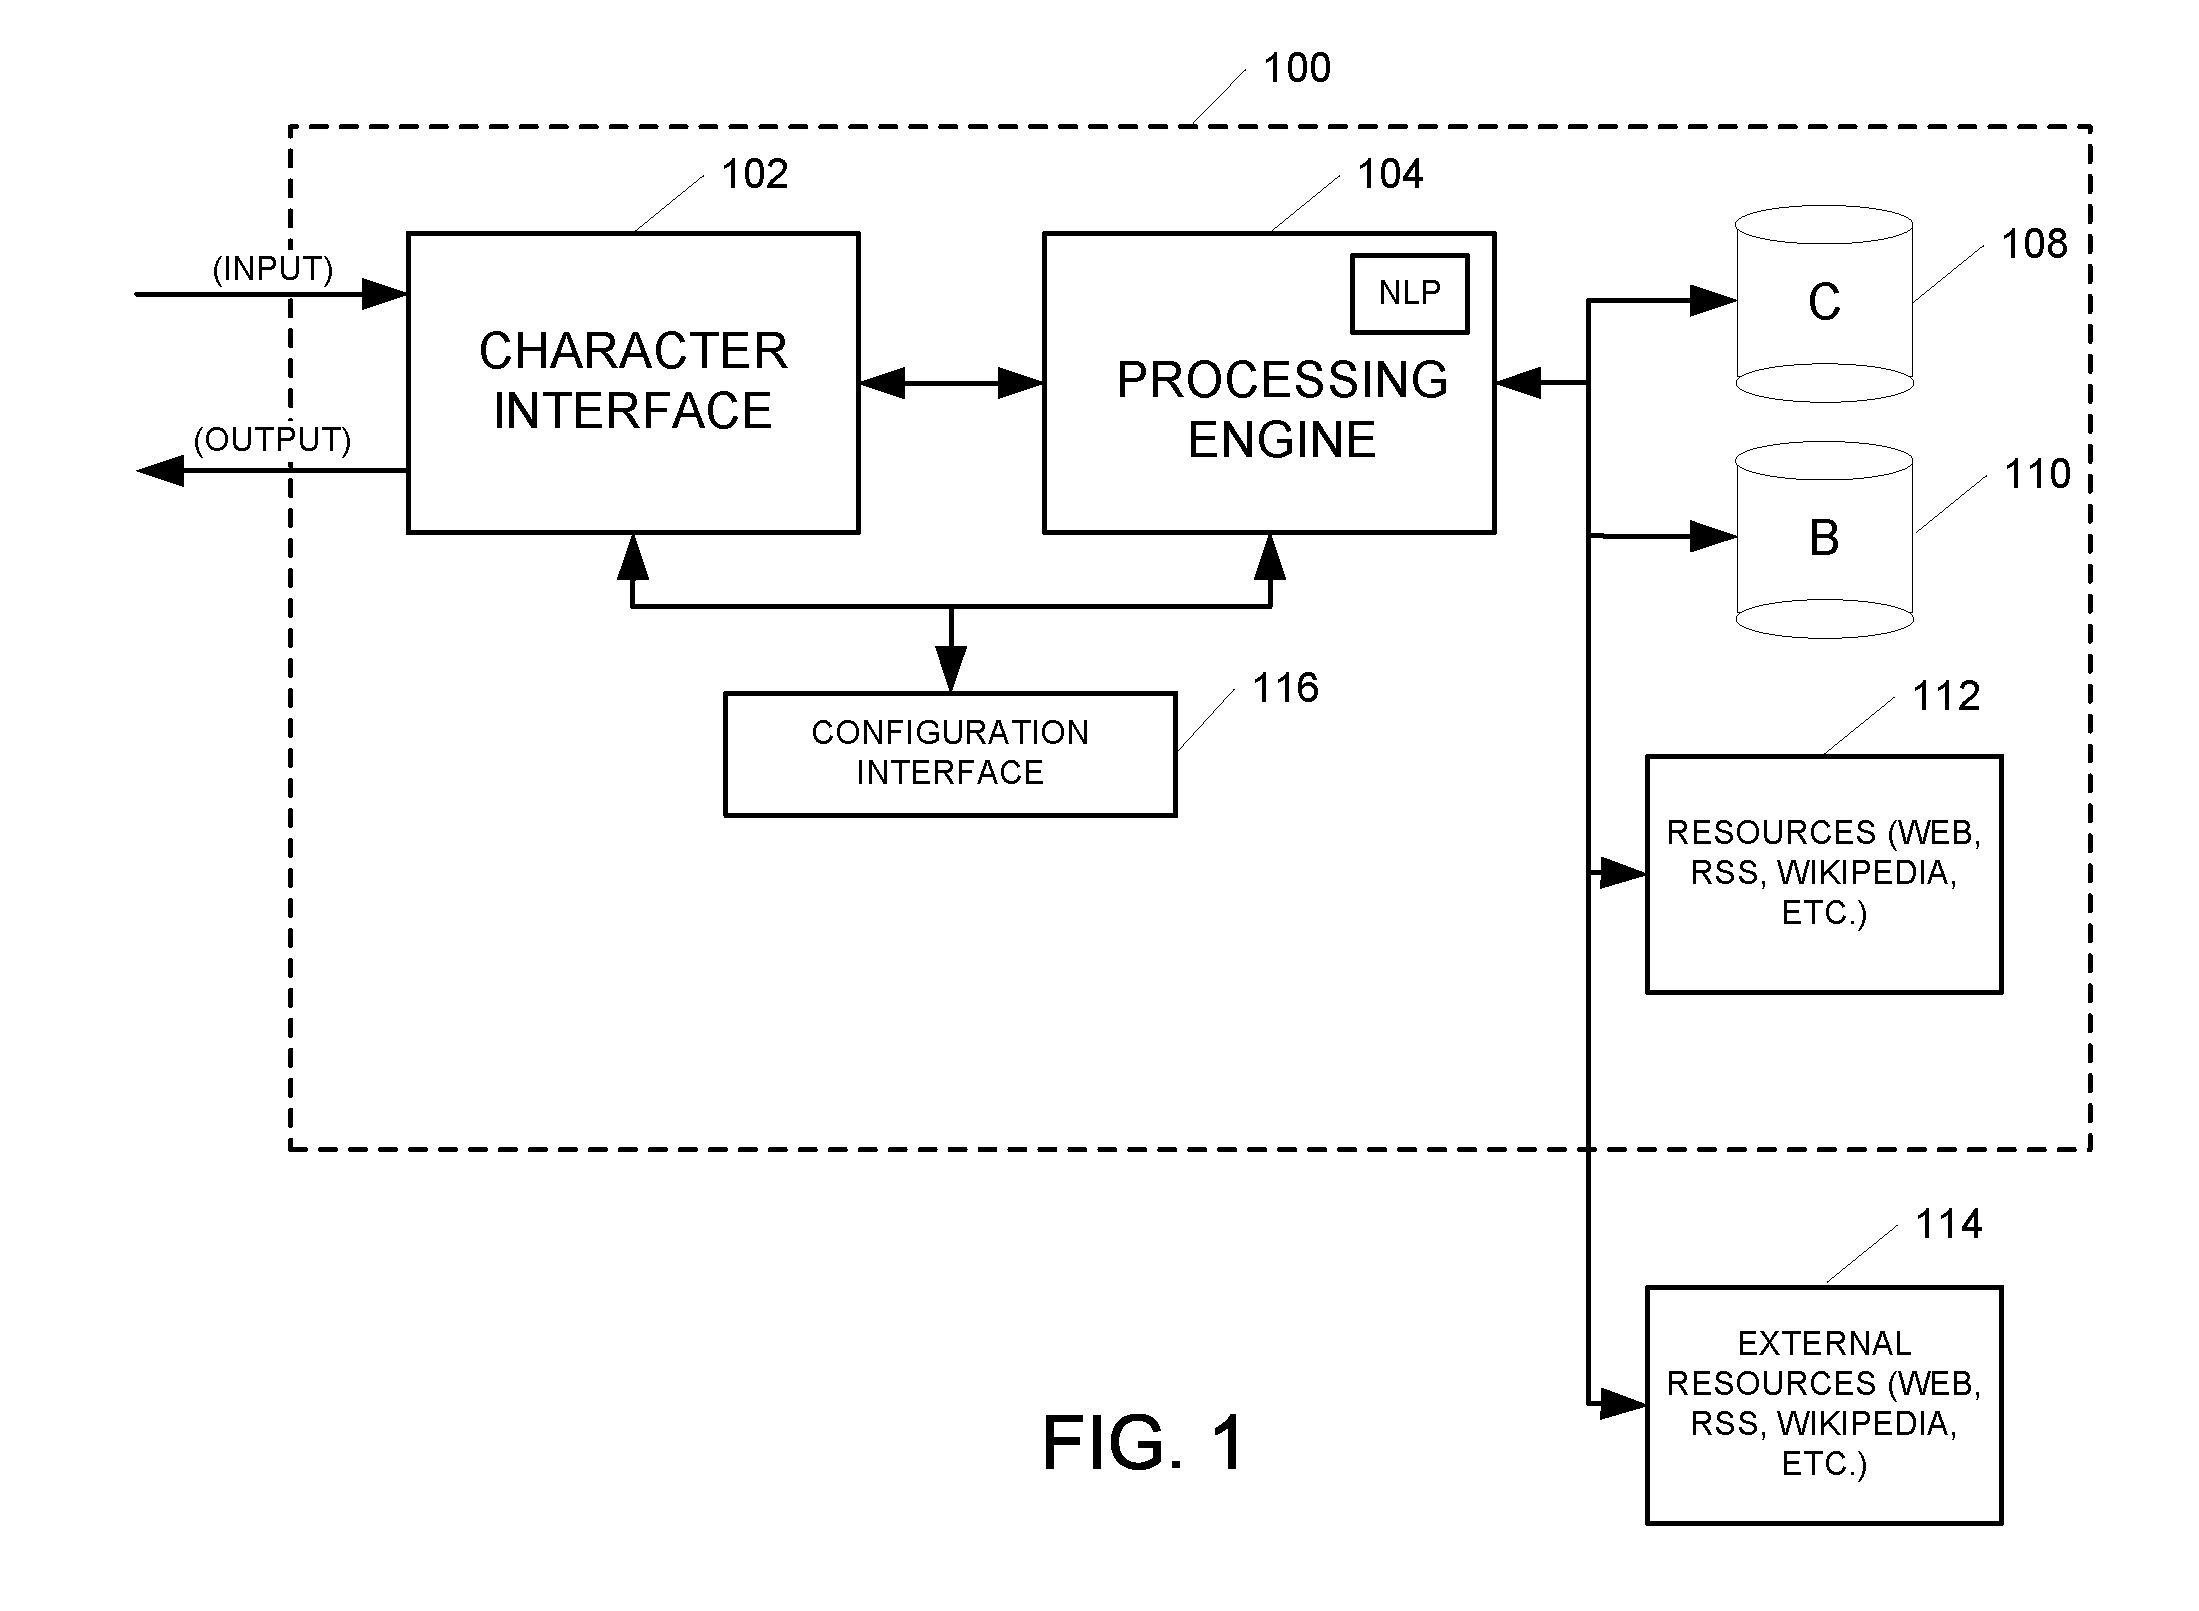 Systems and Methods for Generating and Implementing an Interactive Man-Machine Web Interface Based on Natural Language Processing and Avatar Virtual Agent Based Character